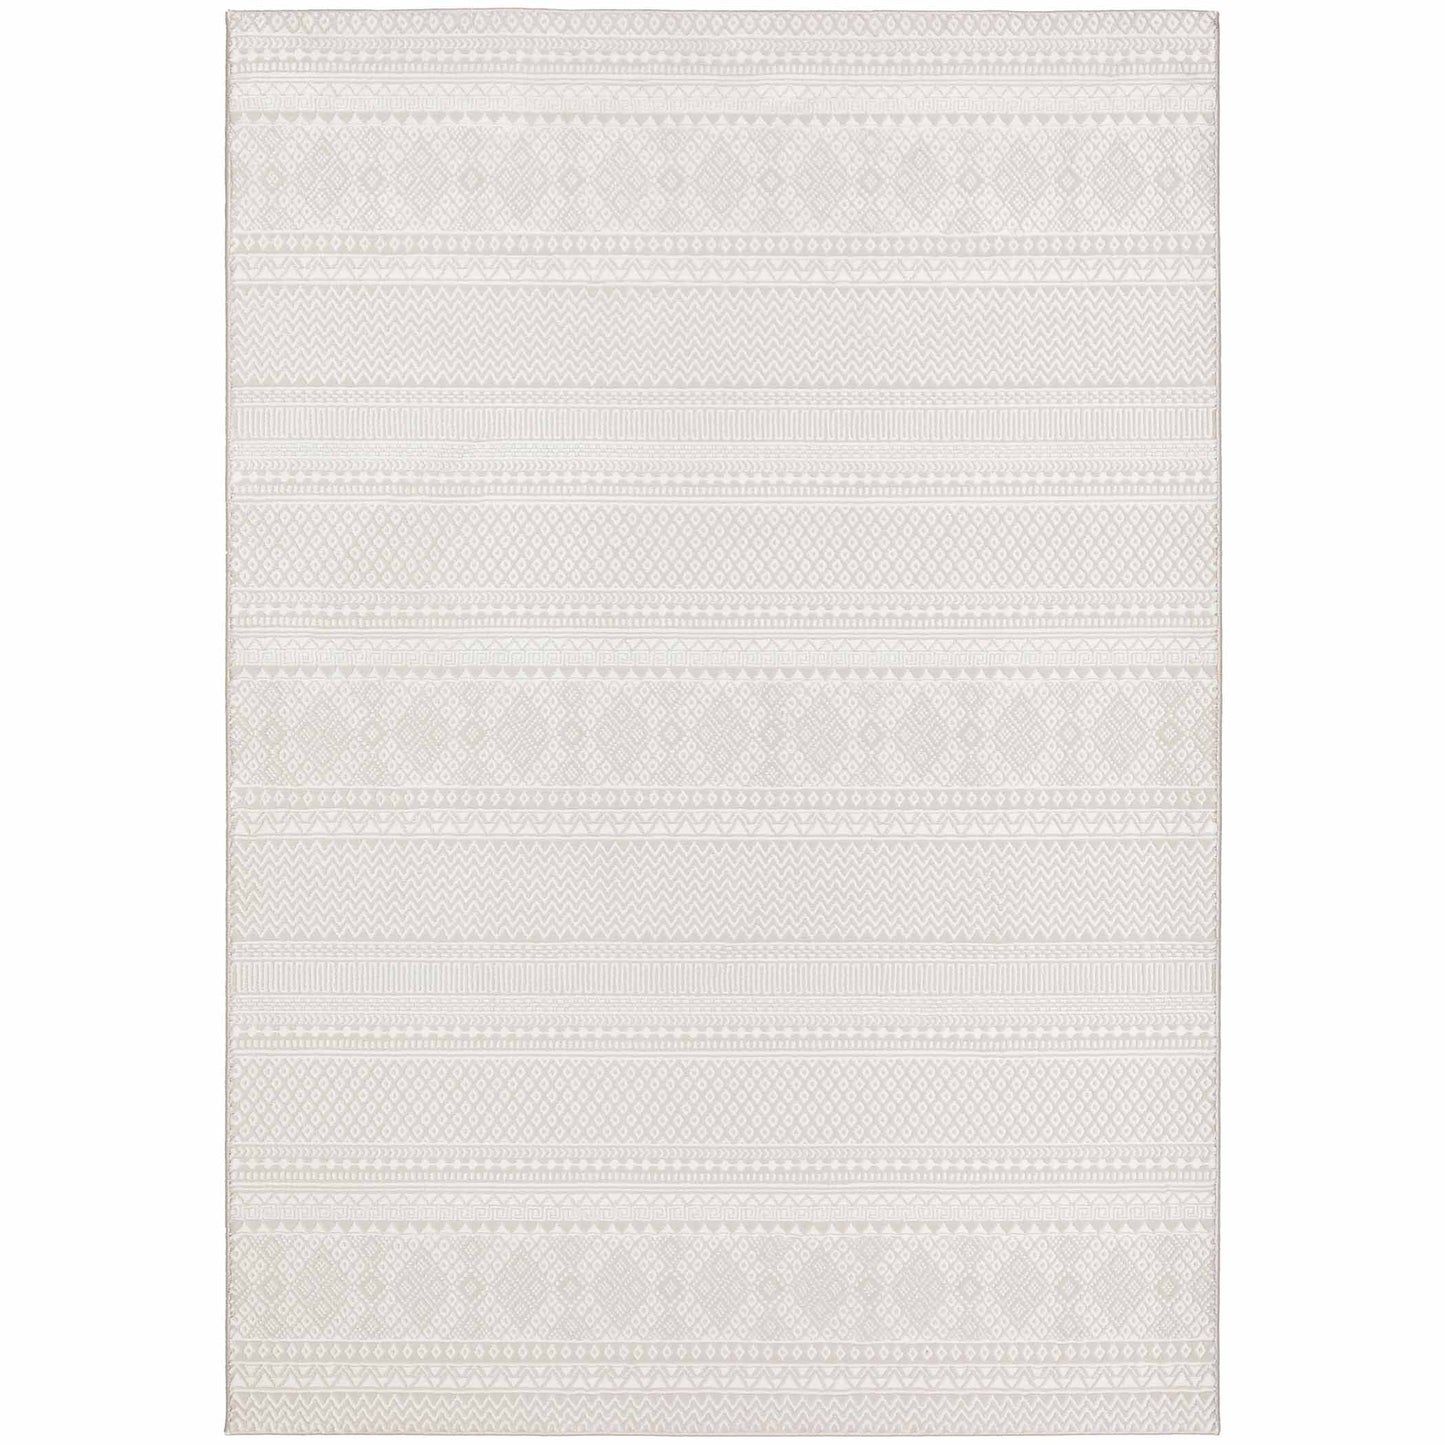 Dalyn Rugs Rhodes RR2 Ivory Transitional Power Woven Rug